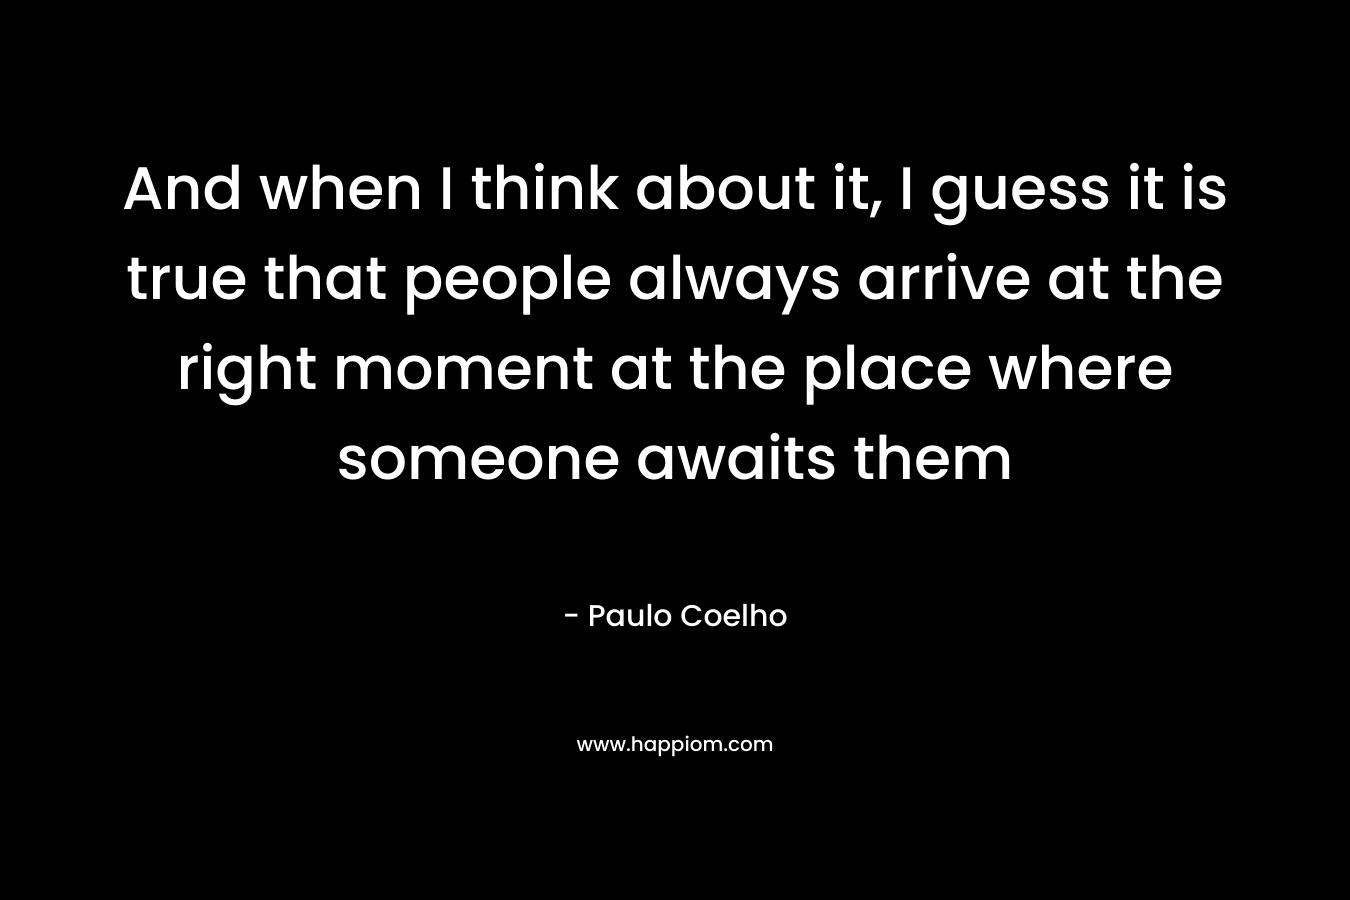 And when I think about it, I guess it is true that people always arrive at the right moment at the place where someone awaits them – Paulo Coelho